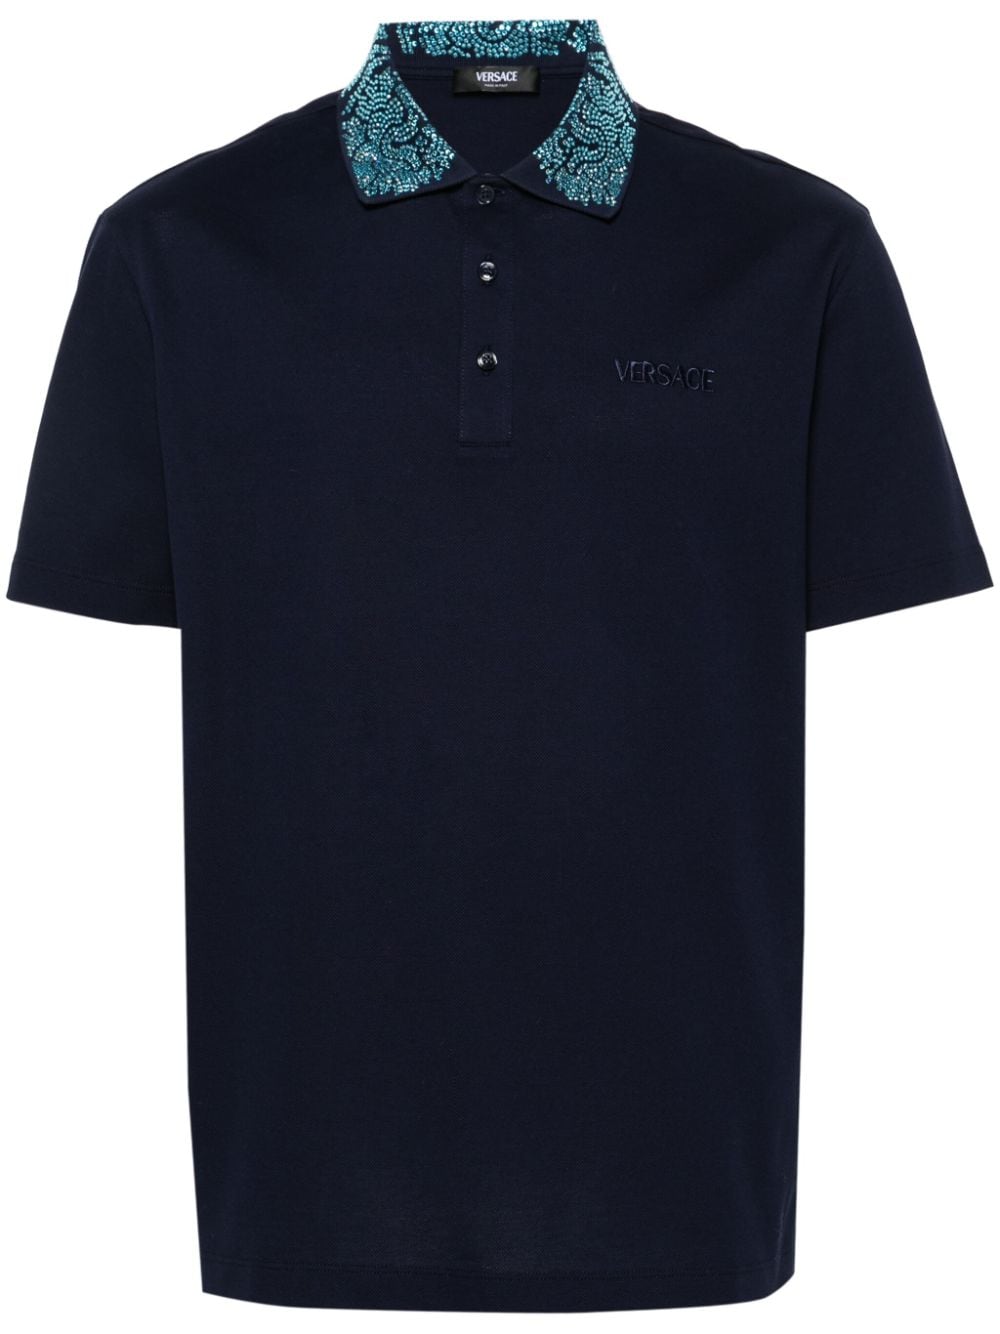 Versace glass crystal-embellished polo shirt - Blue von Versace